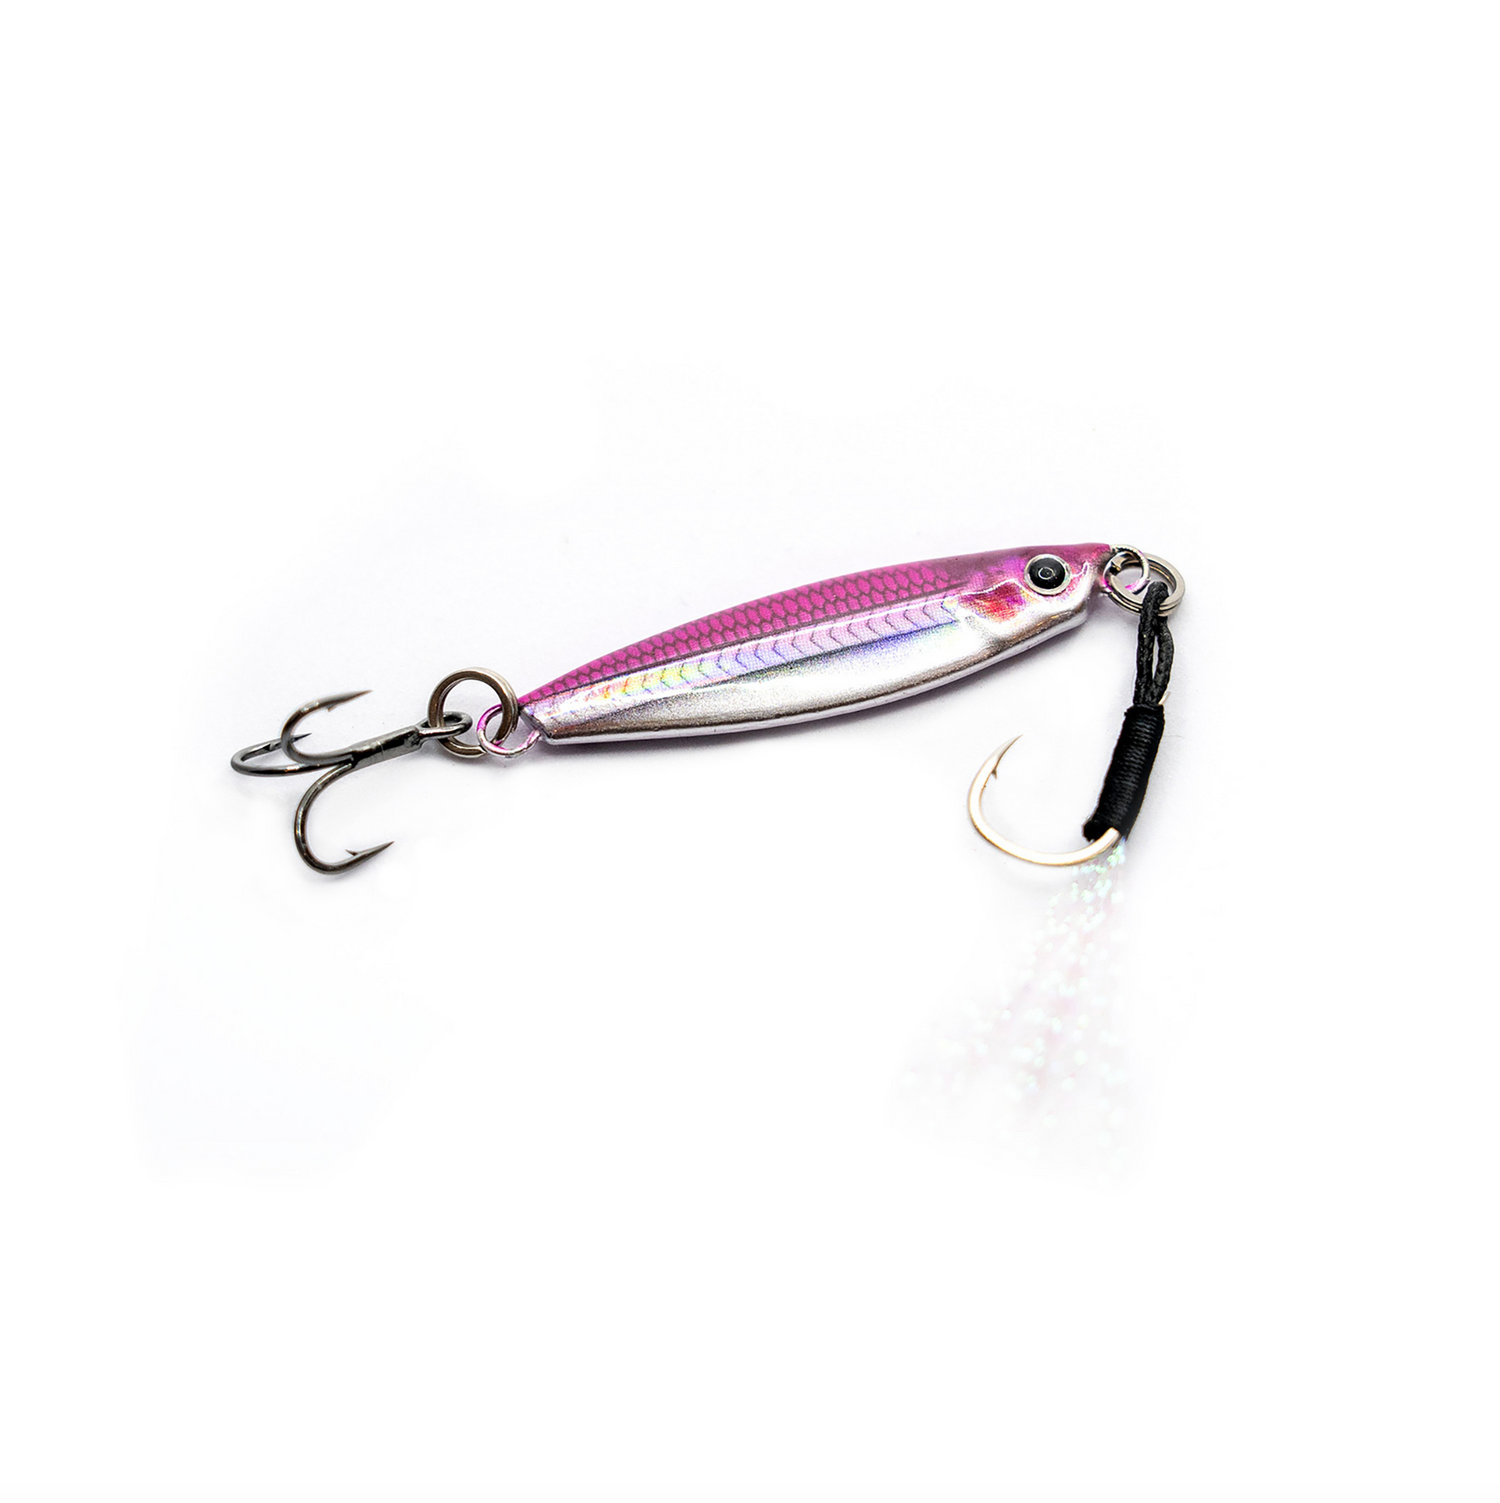 Bouncing Jigs: Micro Jig Lures from the Metal Addict Collection